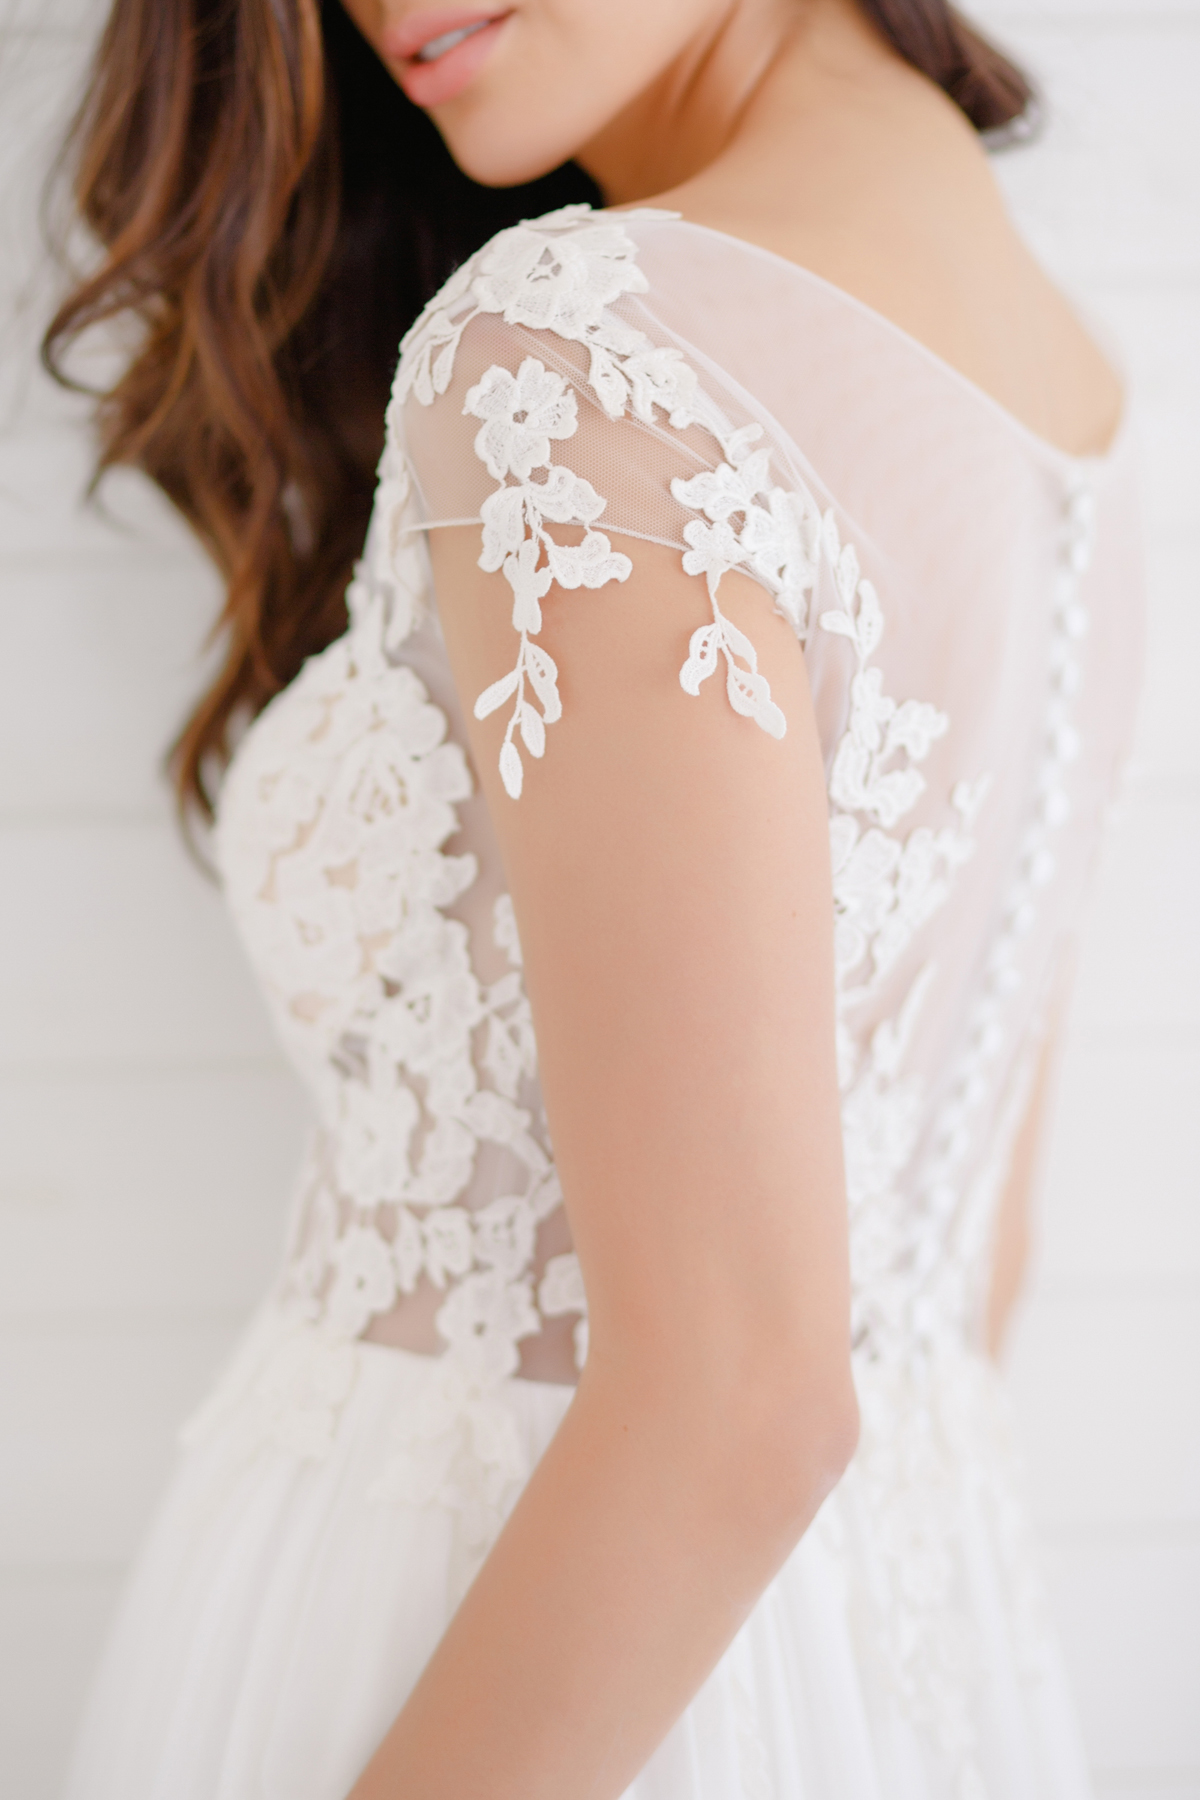 Summer Love – The Exclusive New Collection From Blackburn Couture (Bridal Fashion Supplier Spotlight )